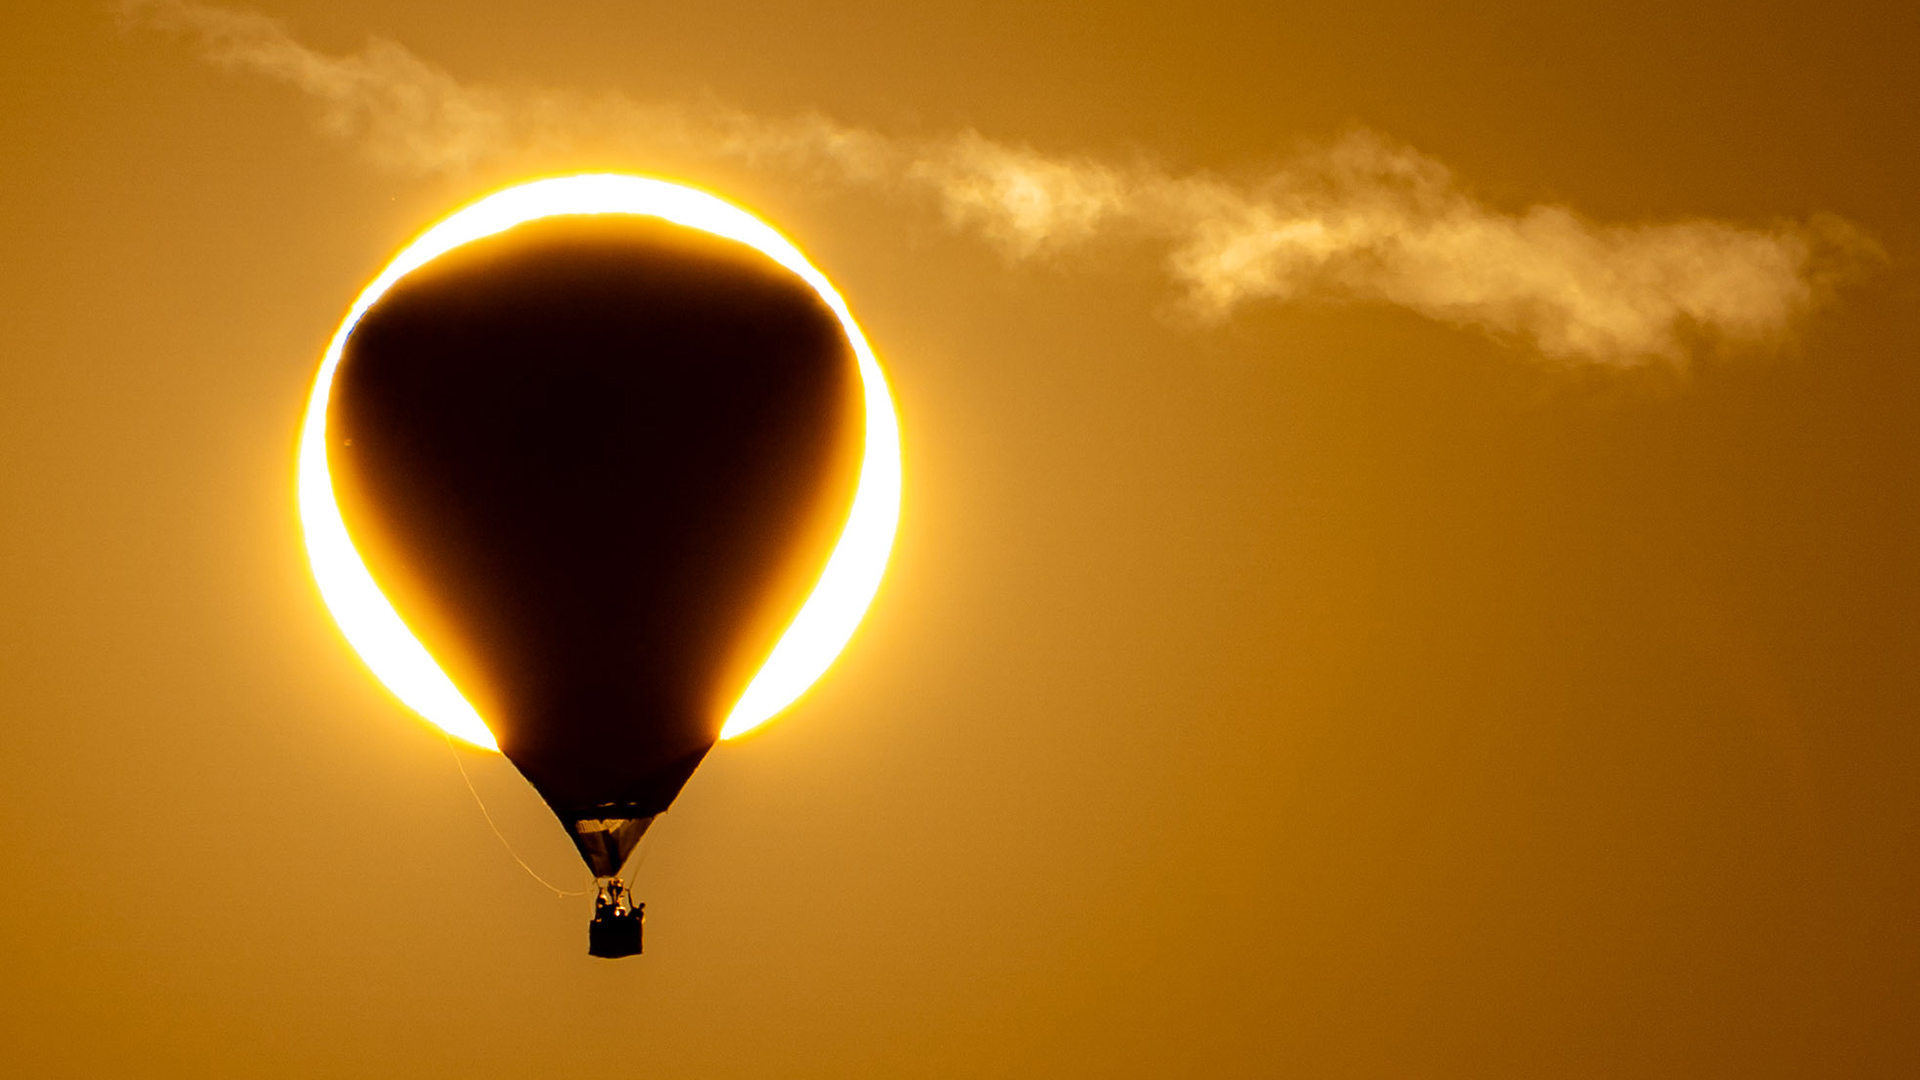 balloon in front of the sun